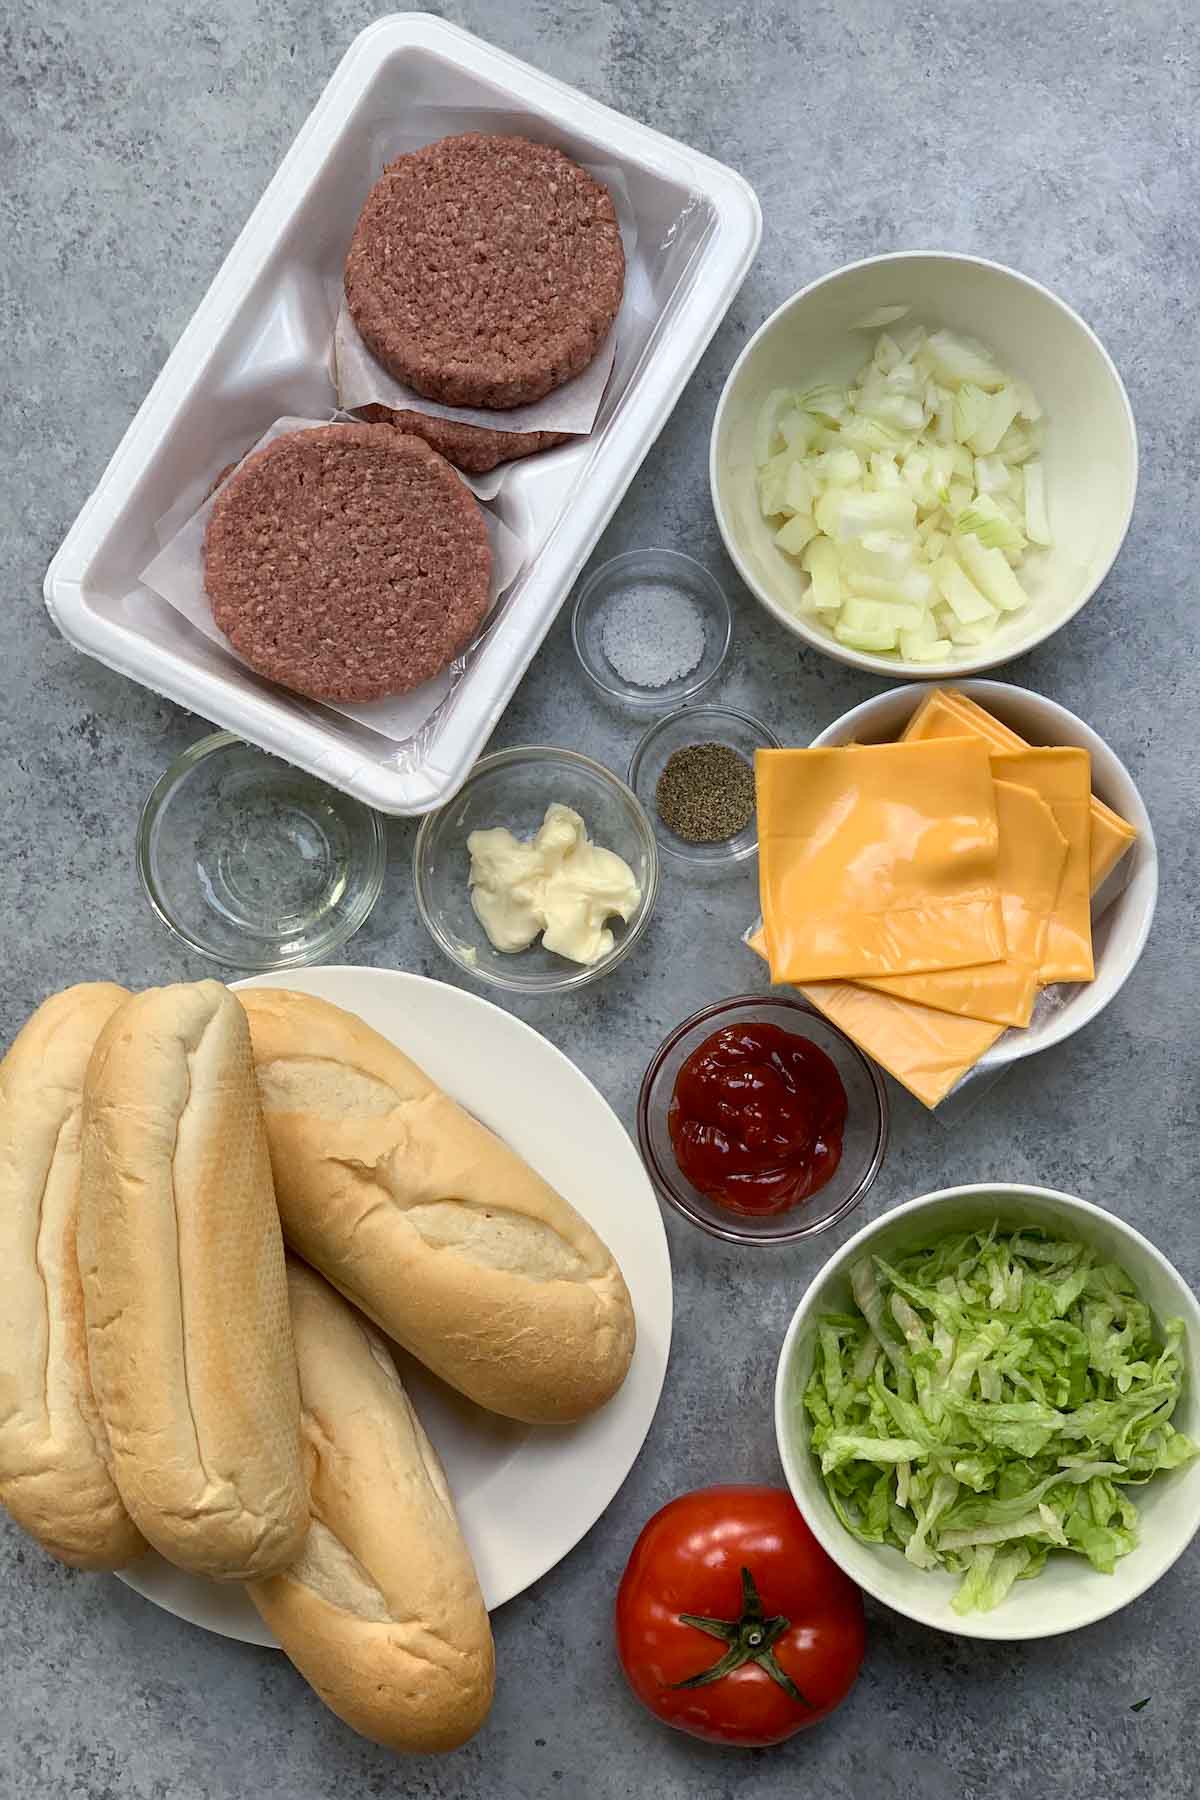 Chopped cheese sandwich recipe ingredients on the counter.